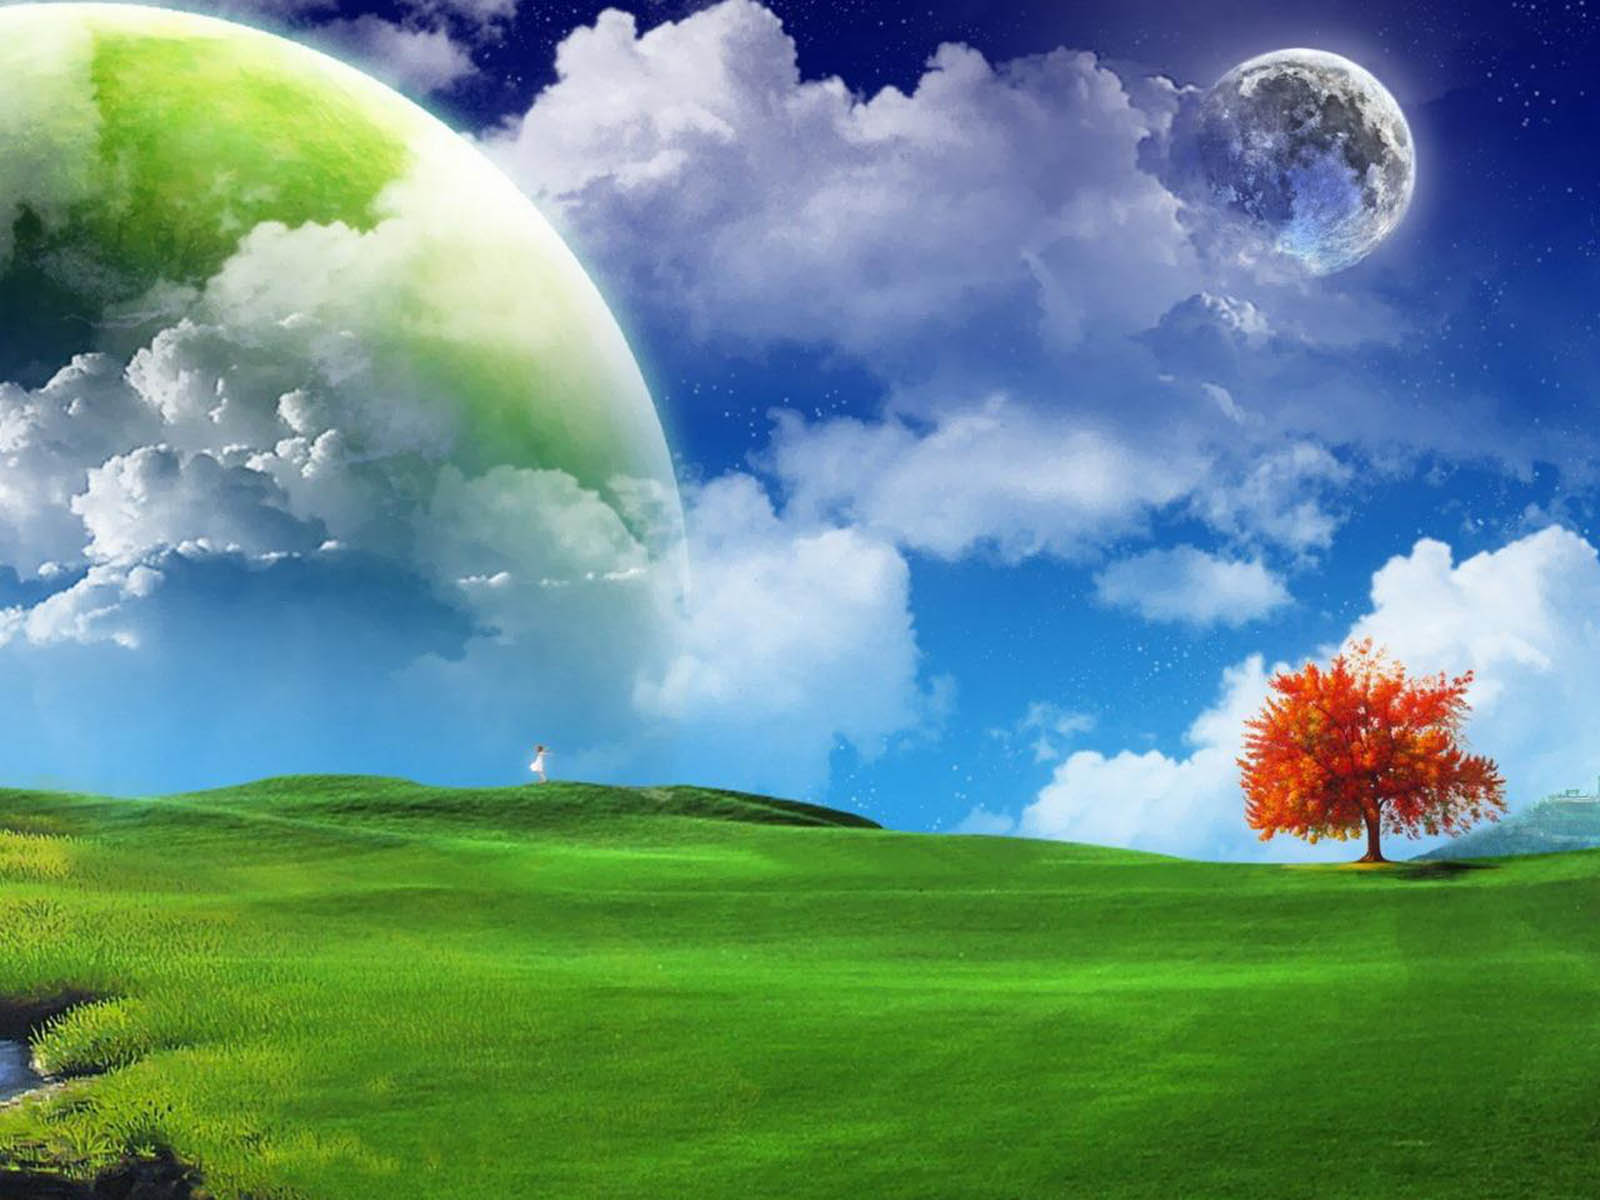 Fantasy Nature Wallpaper Image Photos Pictures And Background